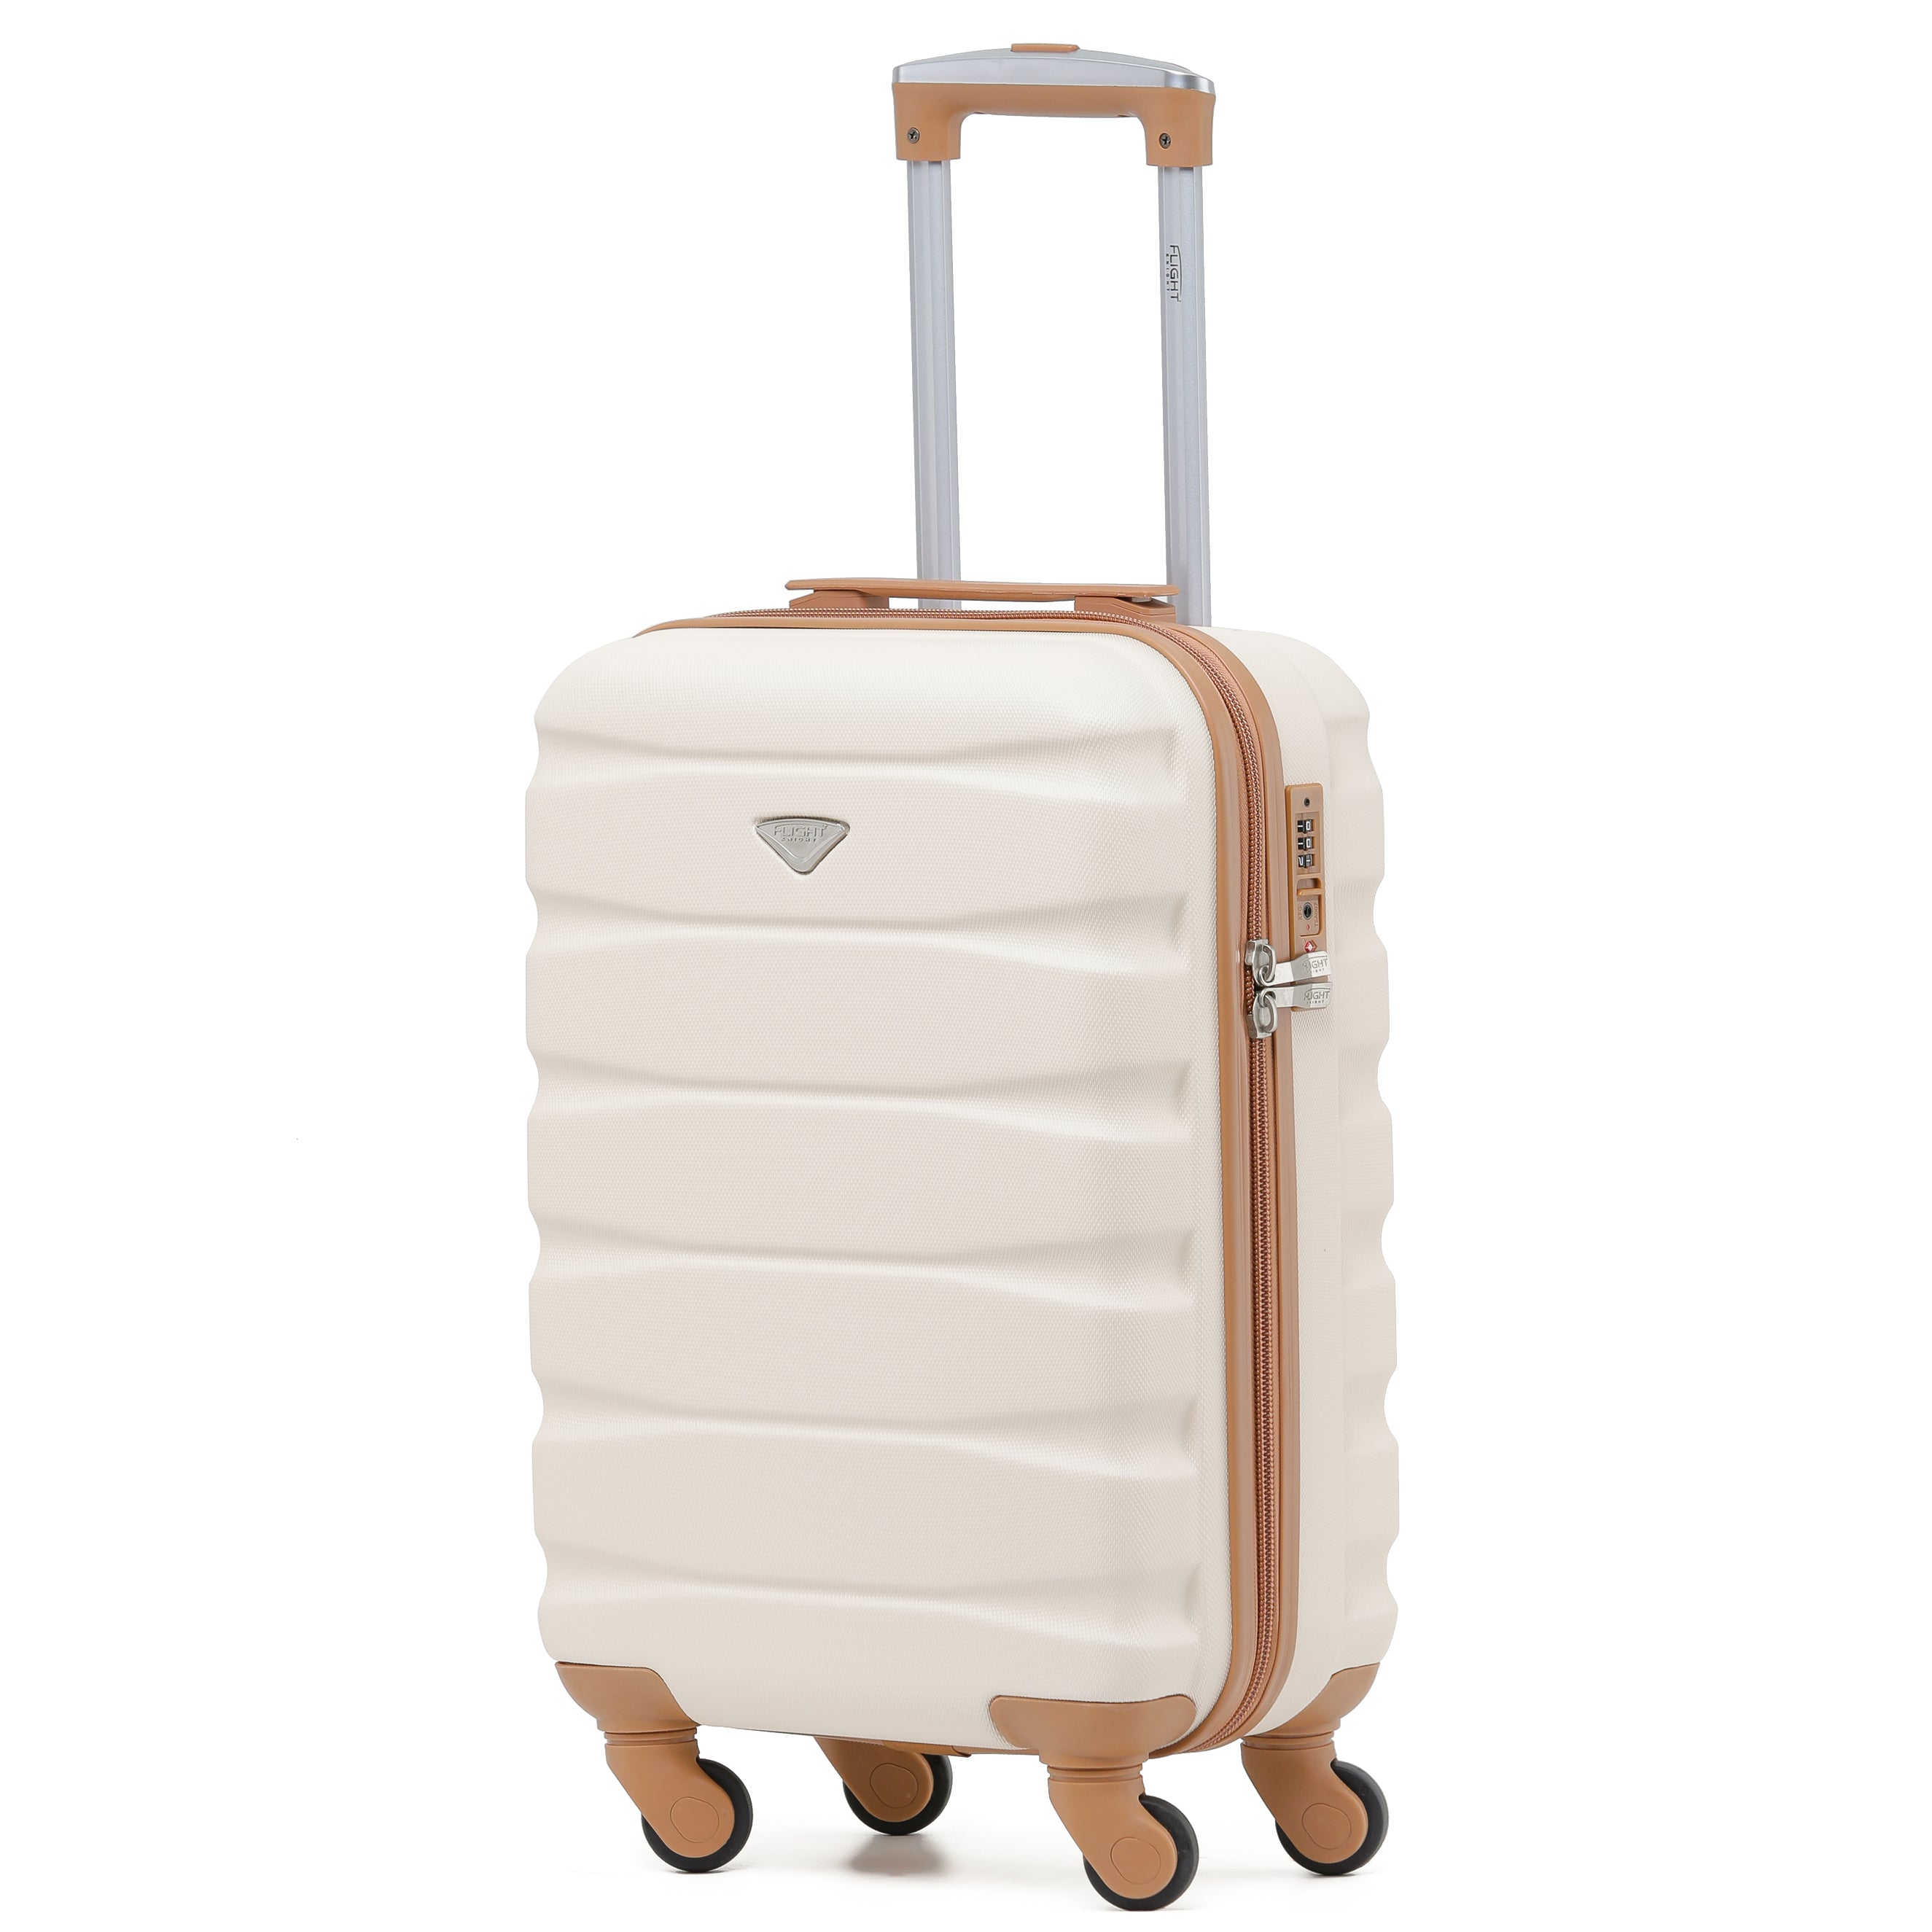 Load image into Gallery viewer, 55x35x20cm TSA Lock Lightweight 4Wheel ABS Hard Cabin Suitcases Carry On Luggage
